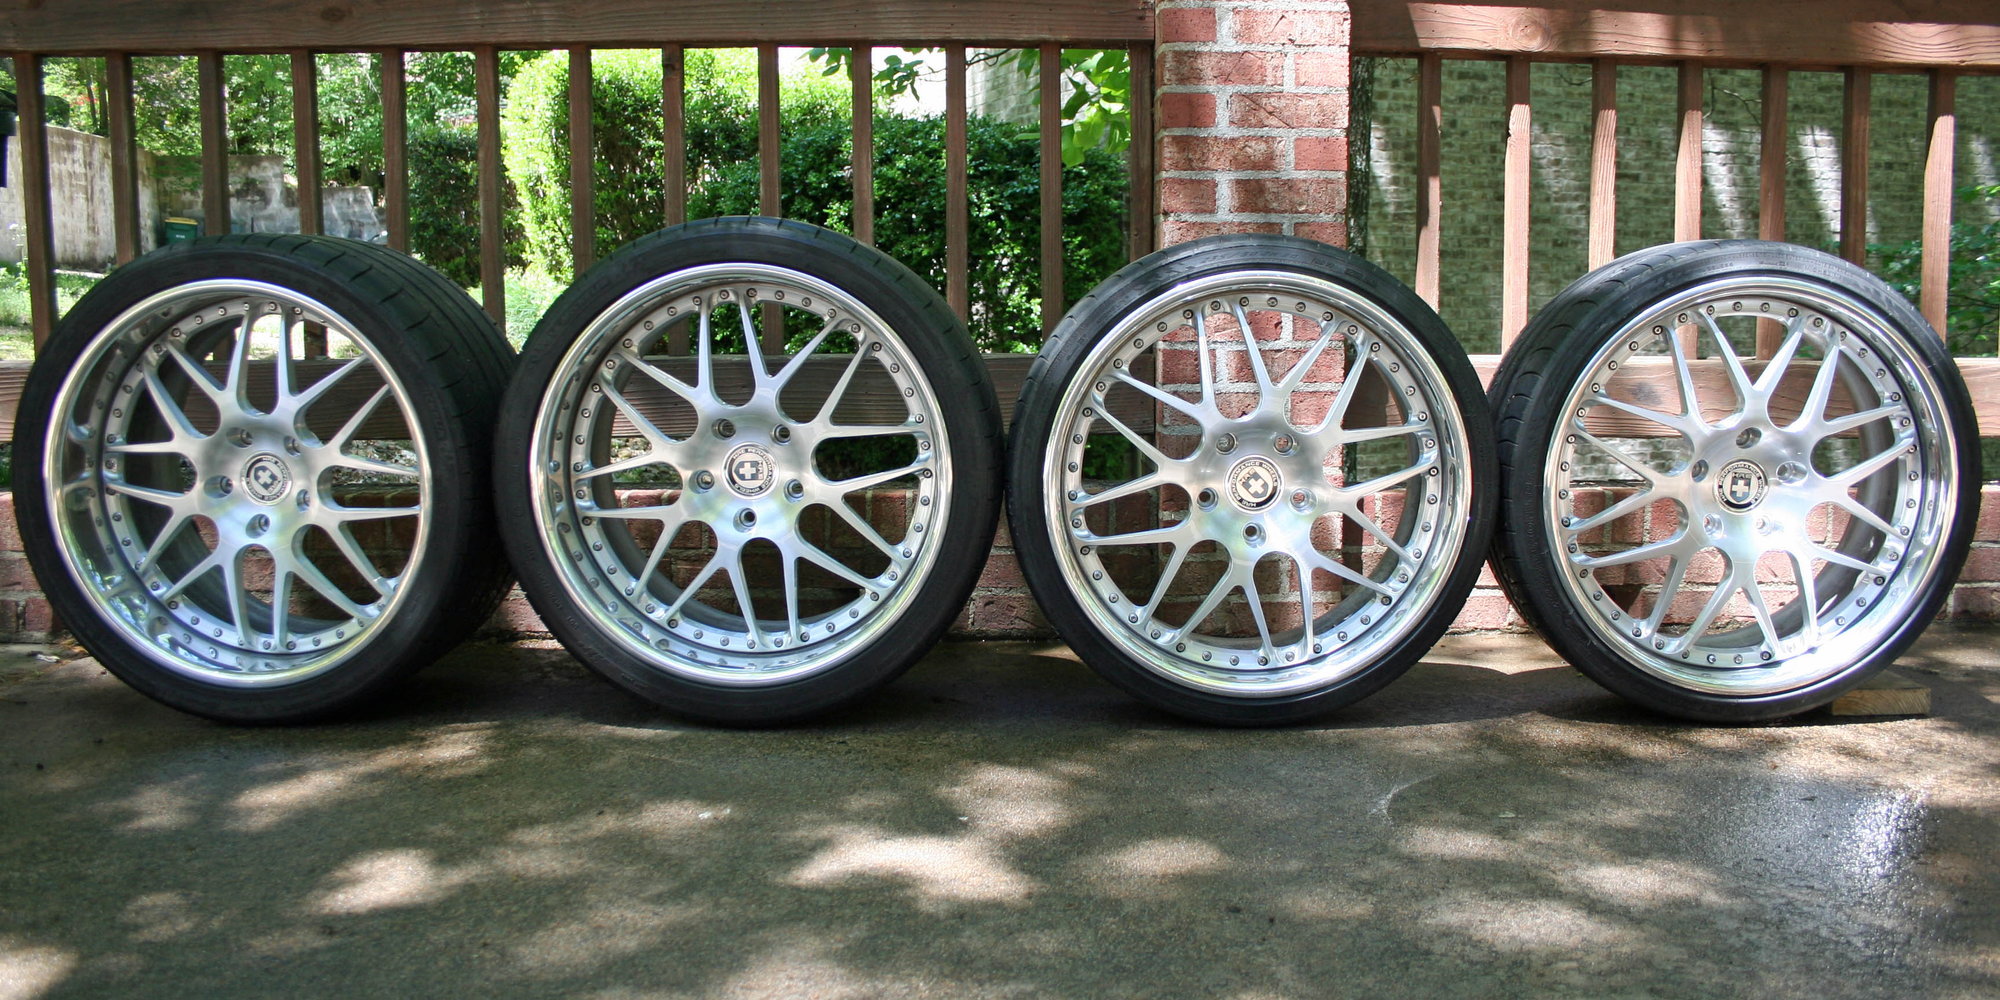 Wheels and Tires/Axles - HRE 20" 590R Wheels & Tires for Porsche 997, 996, wide body GT2, GT3RS, Turbo C4S - Used - 2000 to 2019 Porsche GT2 - Little Rock, AR 72212, United States